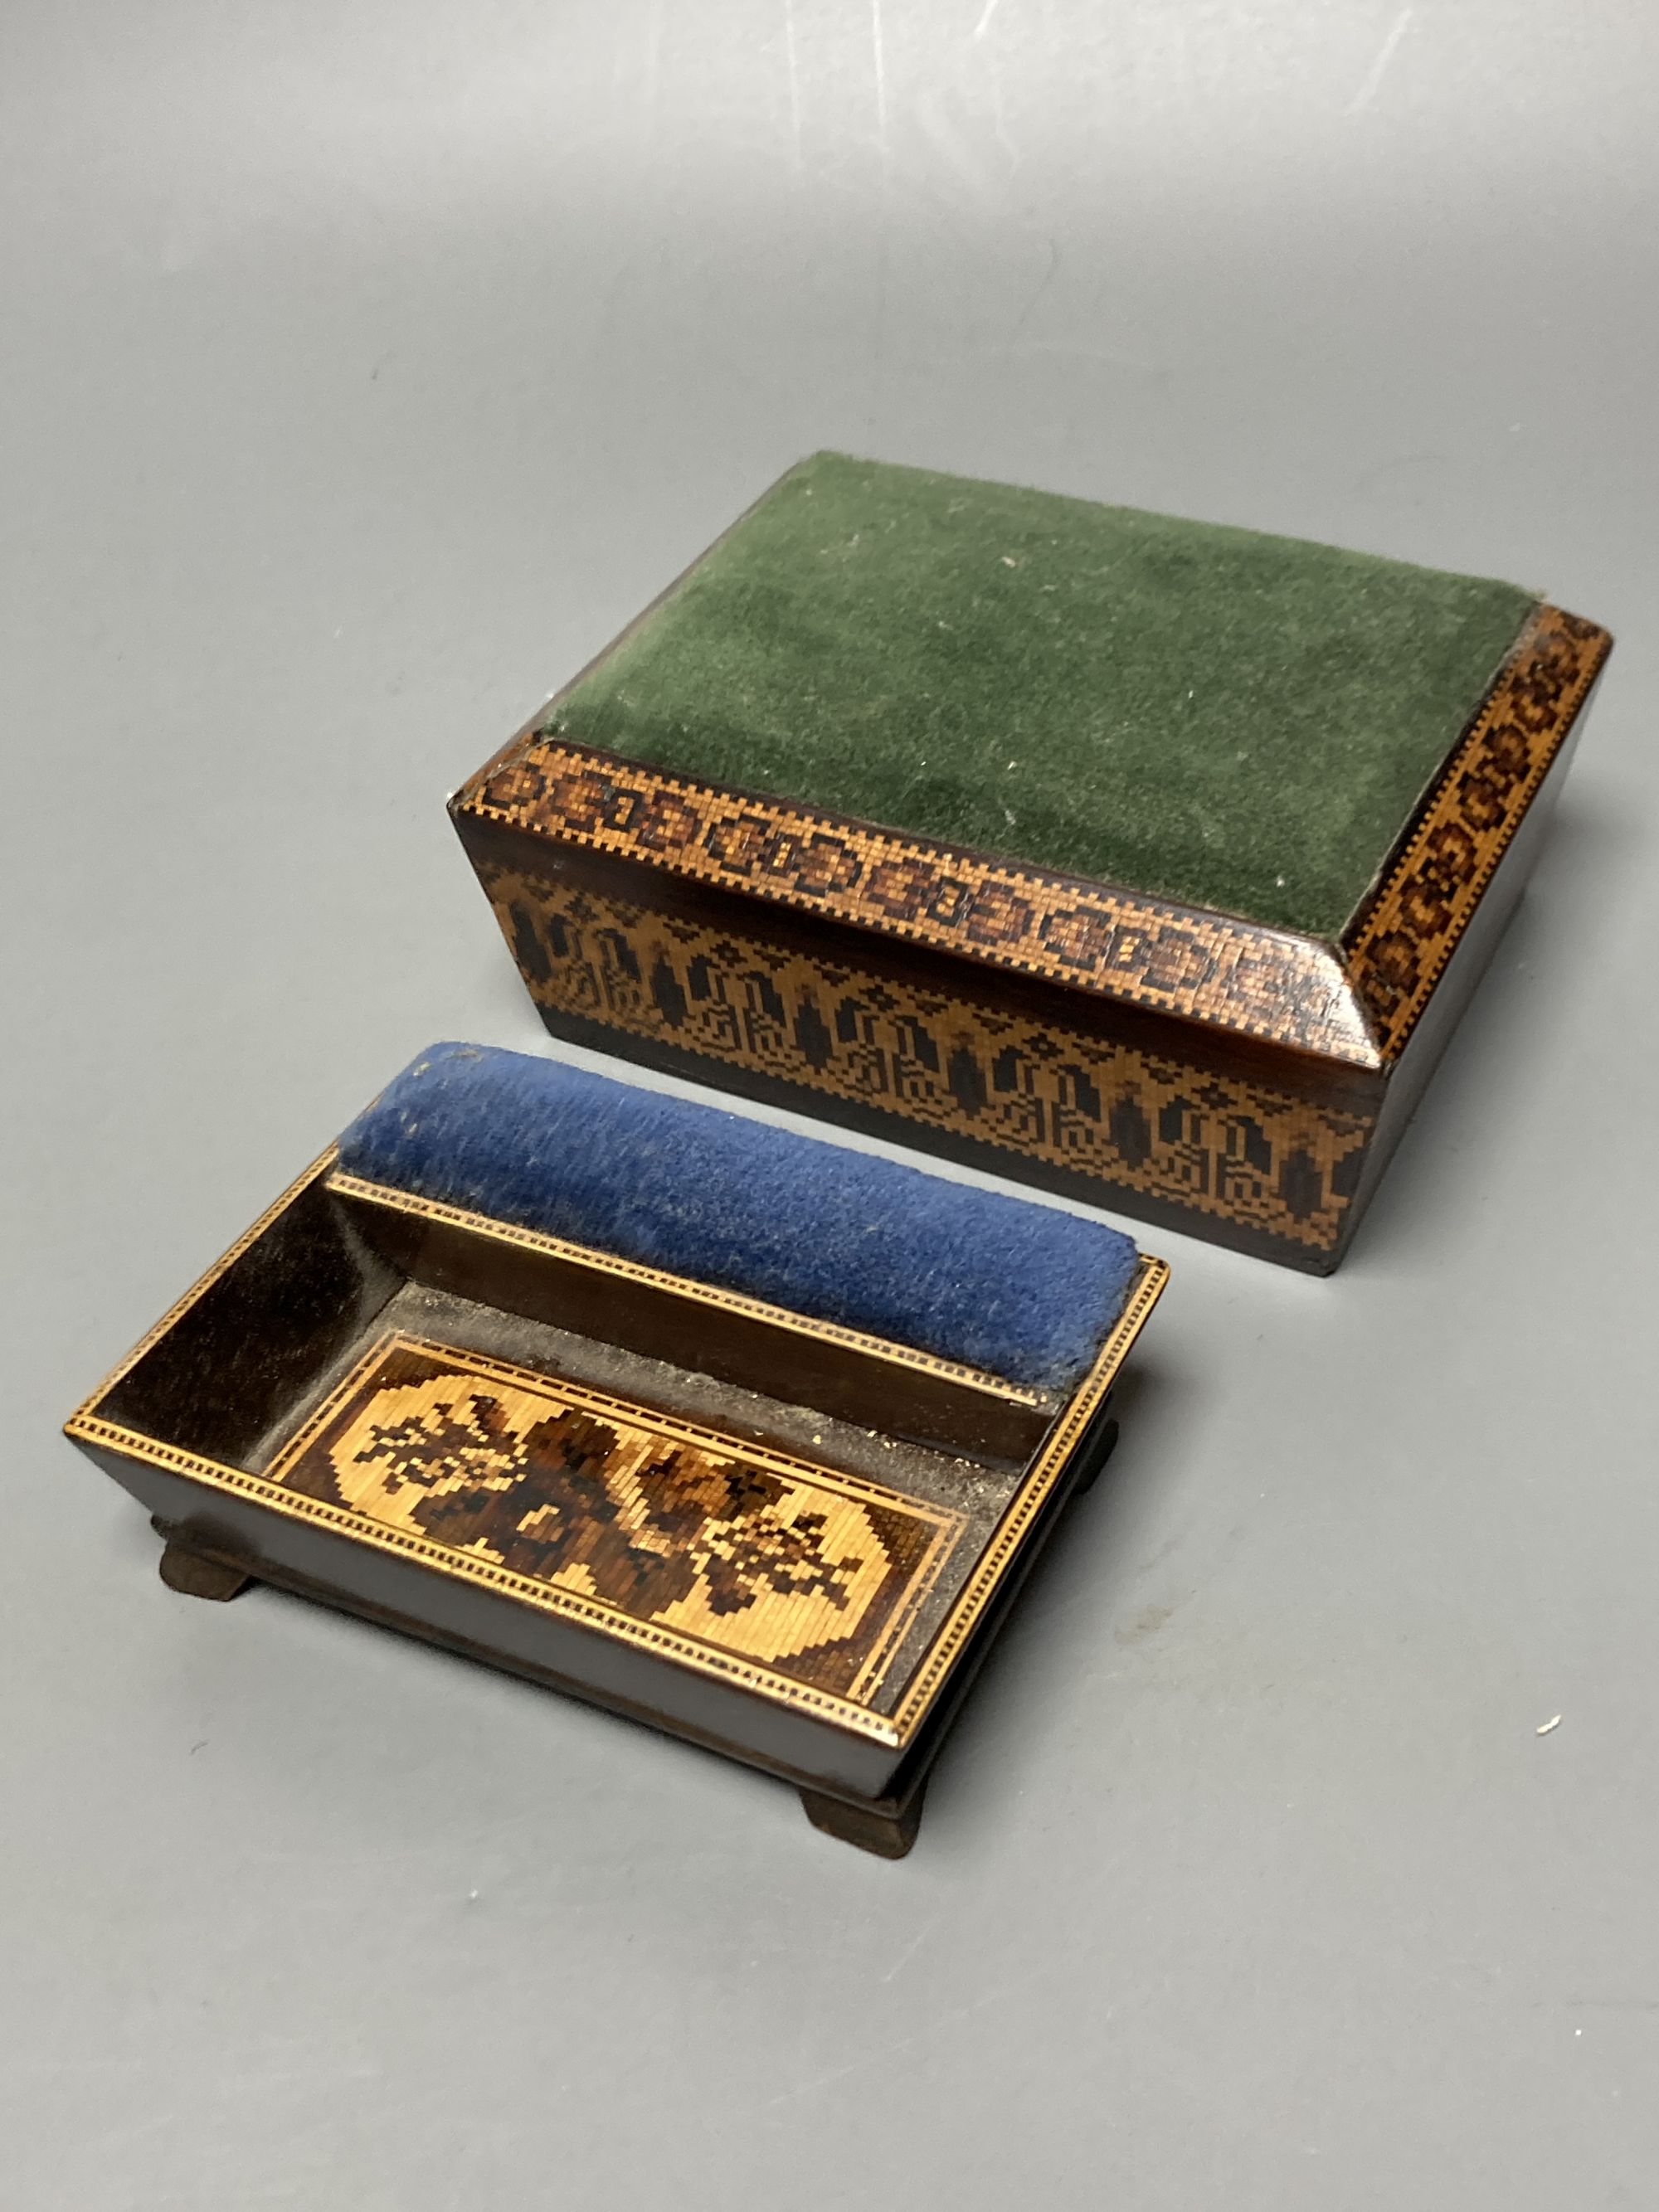 A Tunbridge ware rosewood and tesserae mosaic pin cushion and a similar combined tray and pin cushion, 2nd half 19th century, 12.5 and 9.9cm